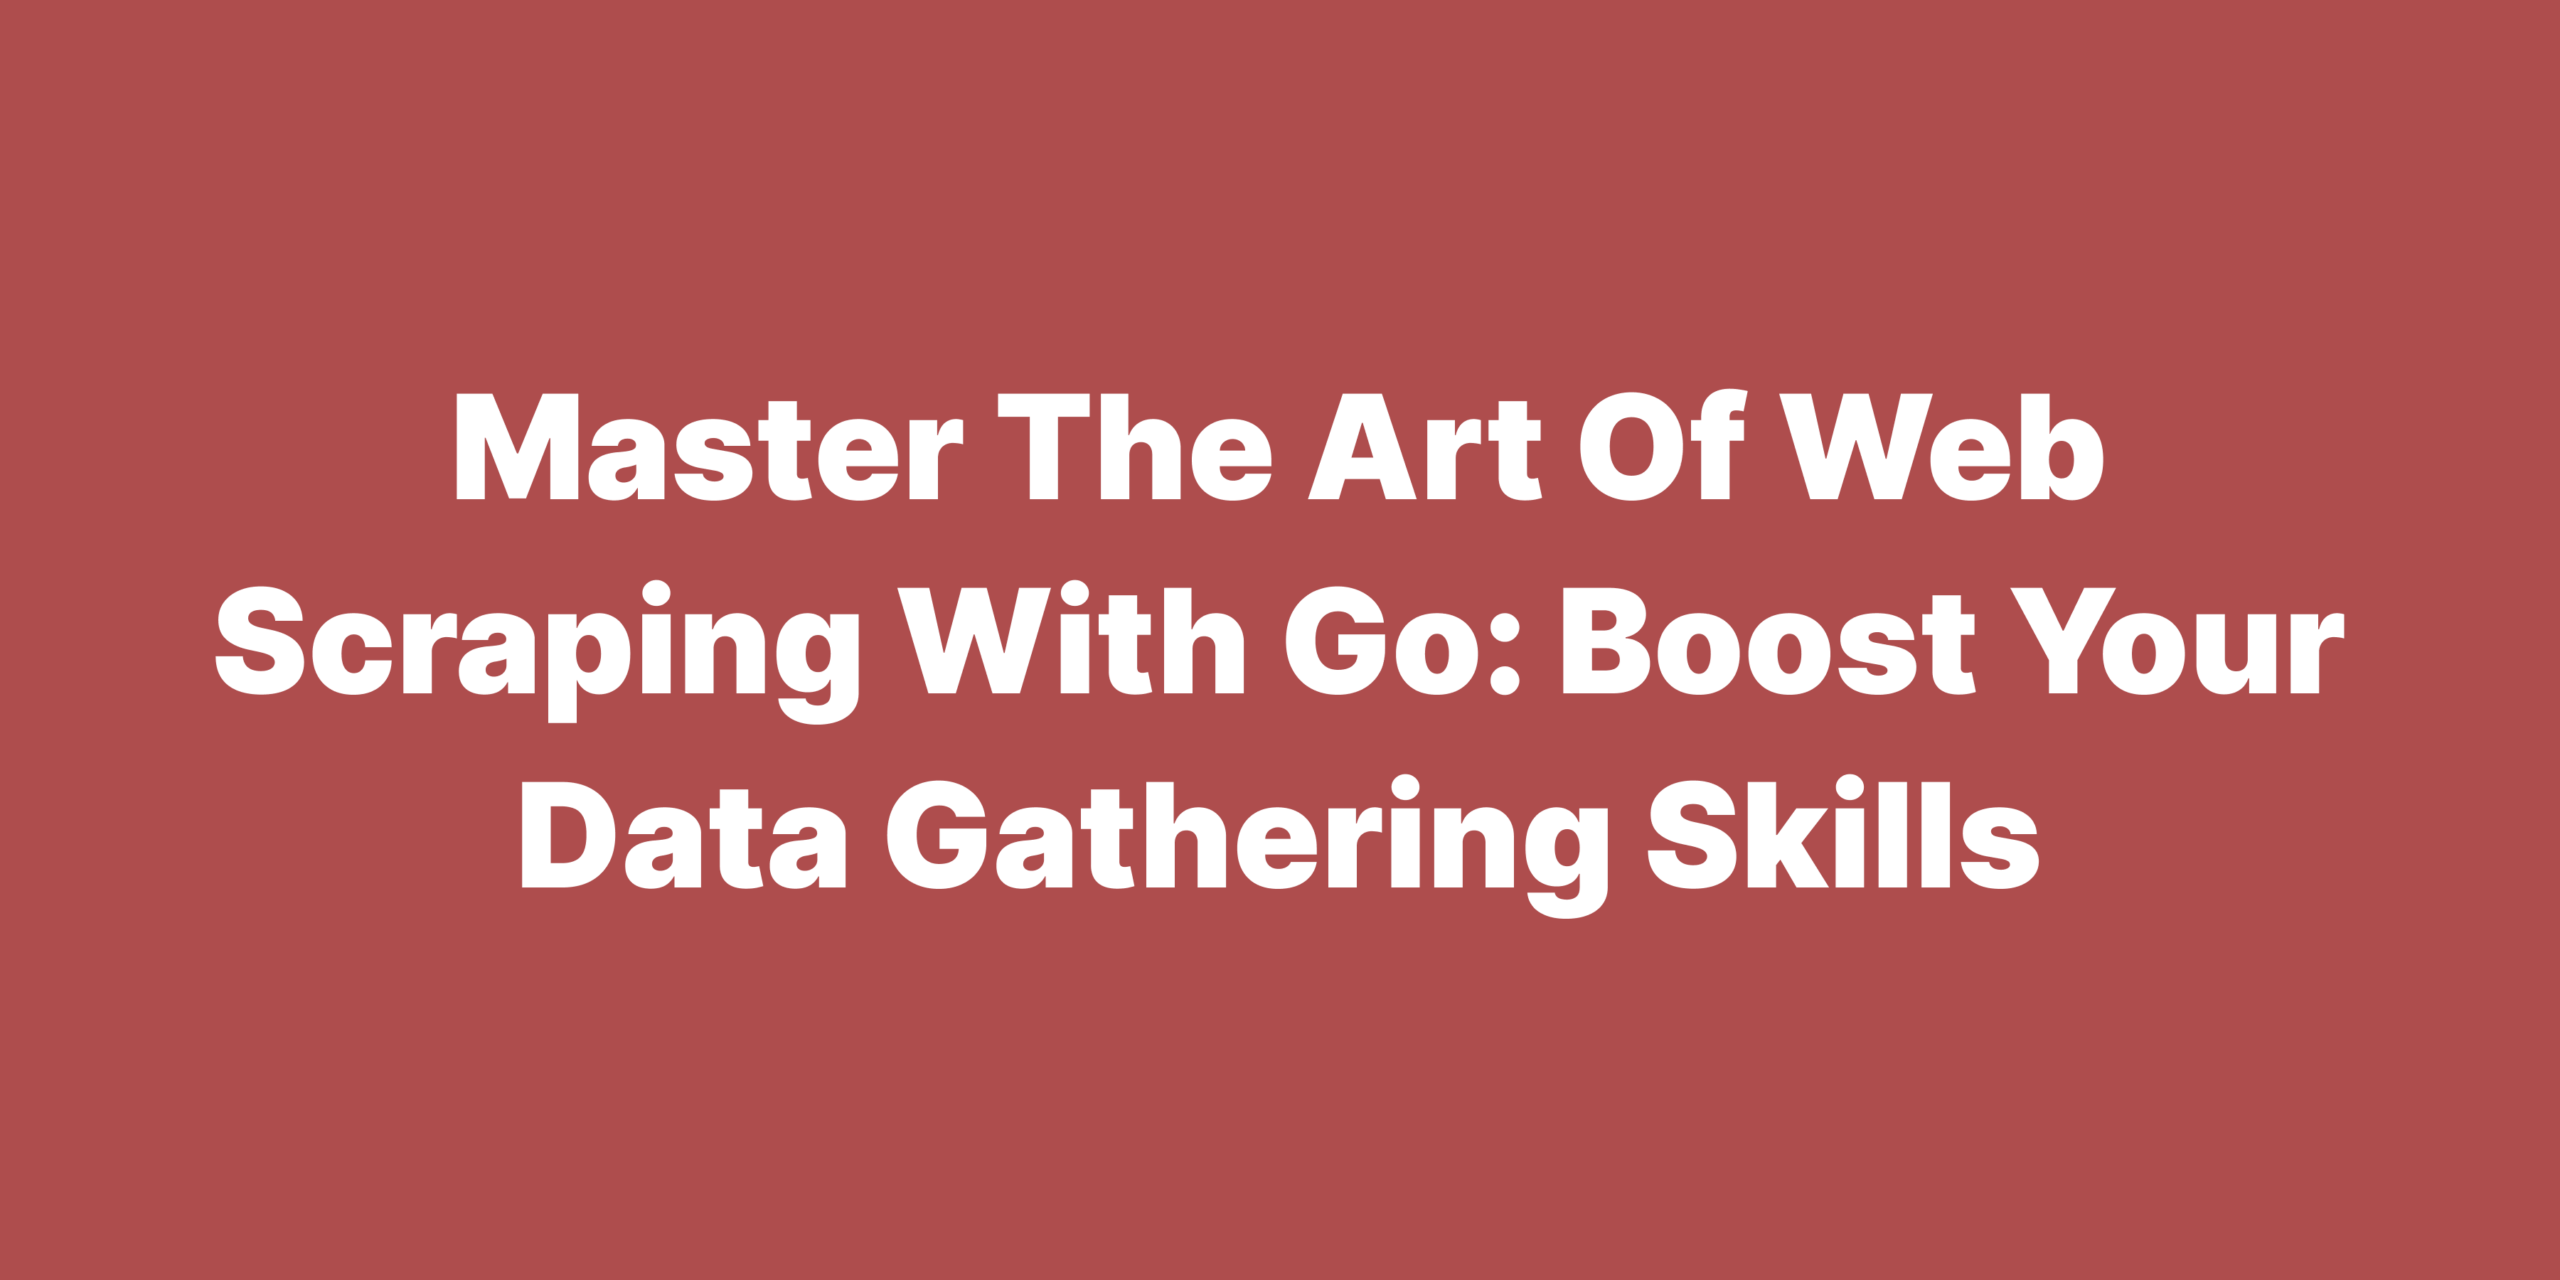 Master the art of web scraping with go boost your data gathering skills